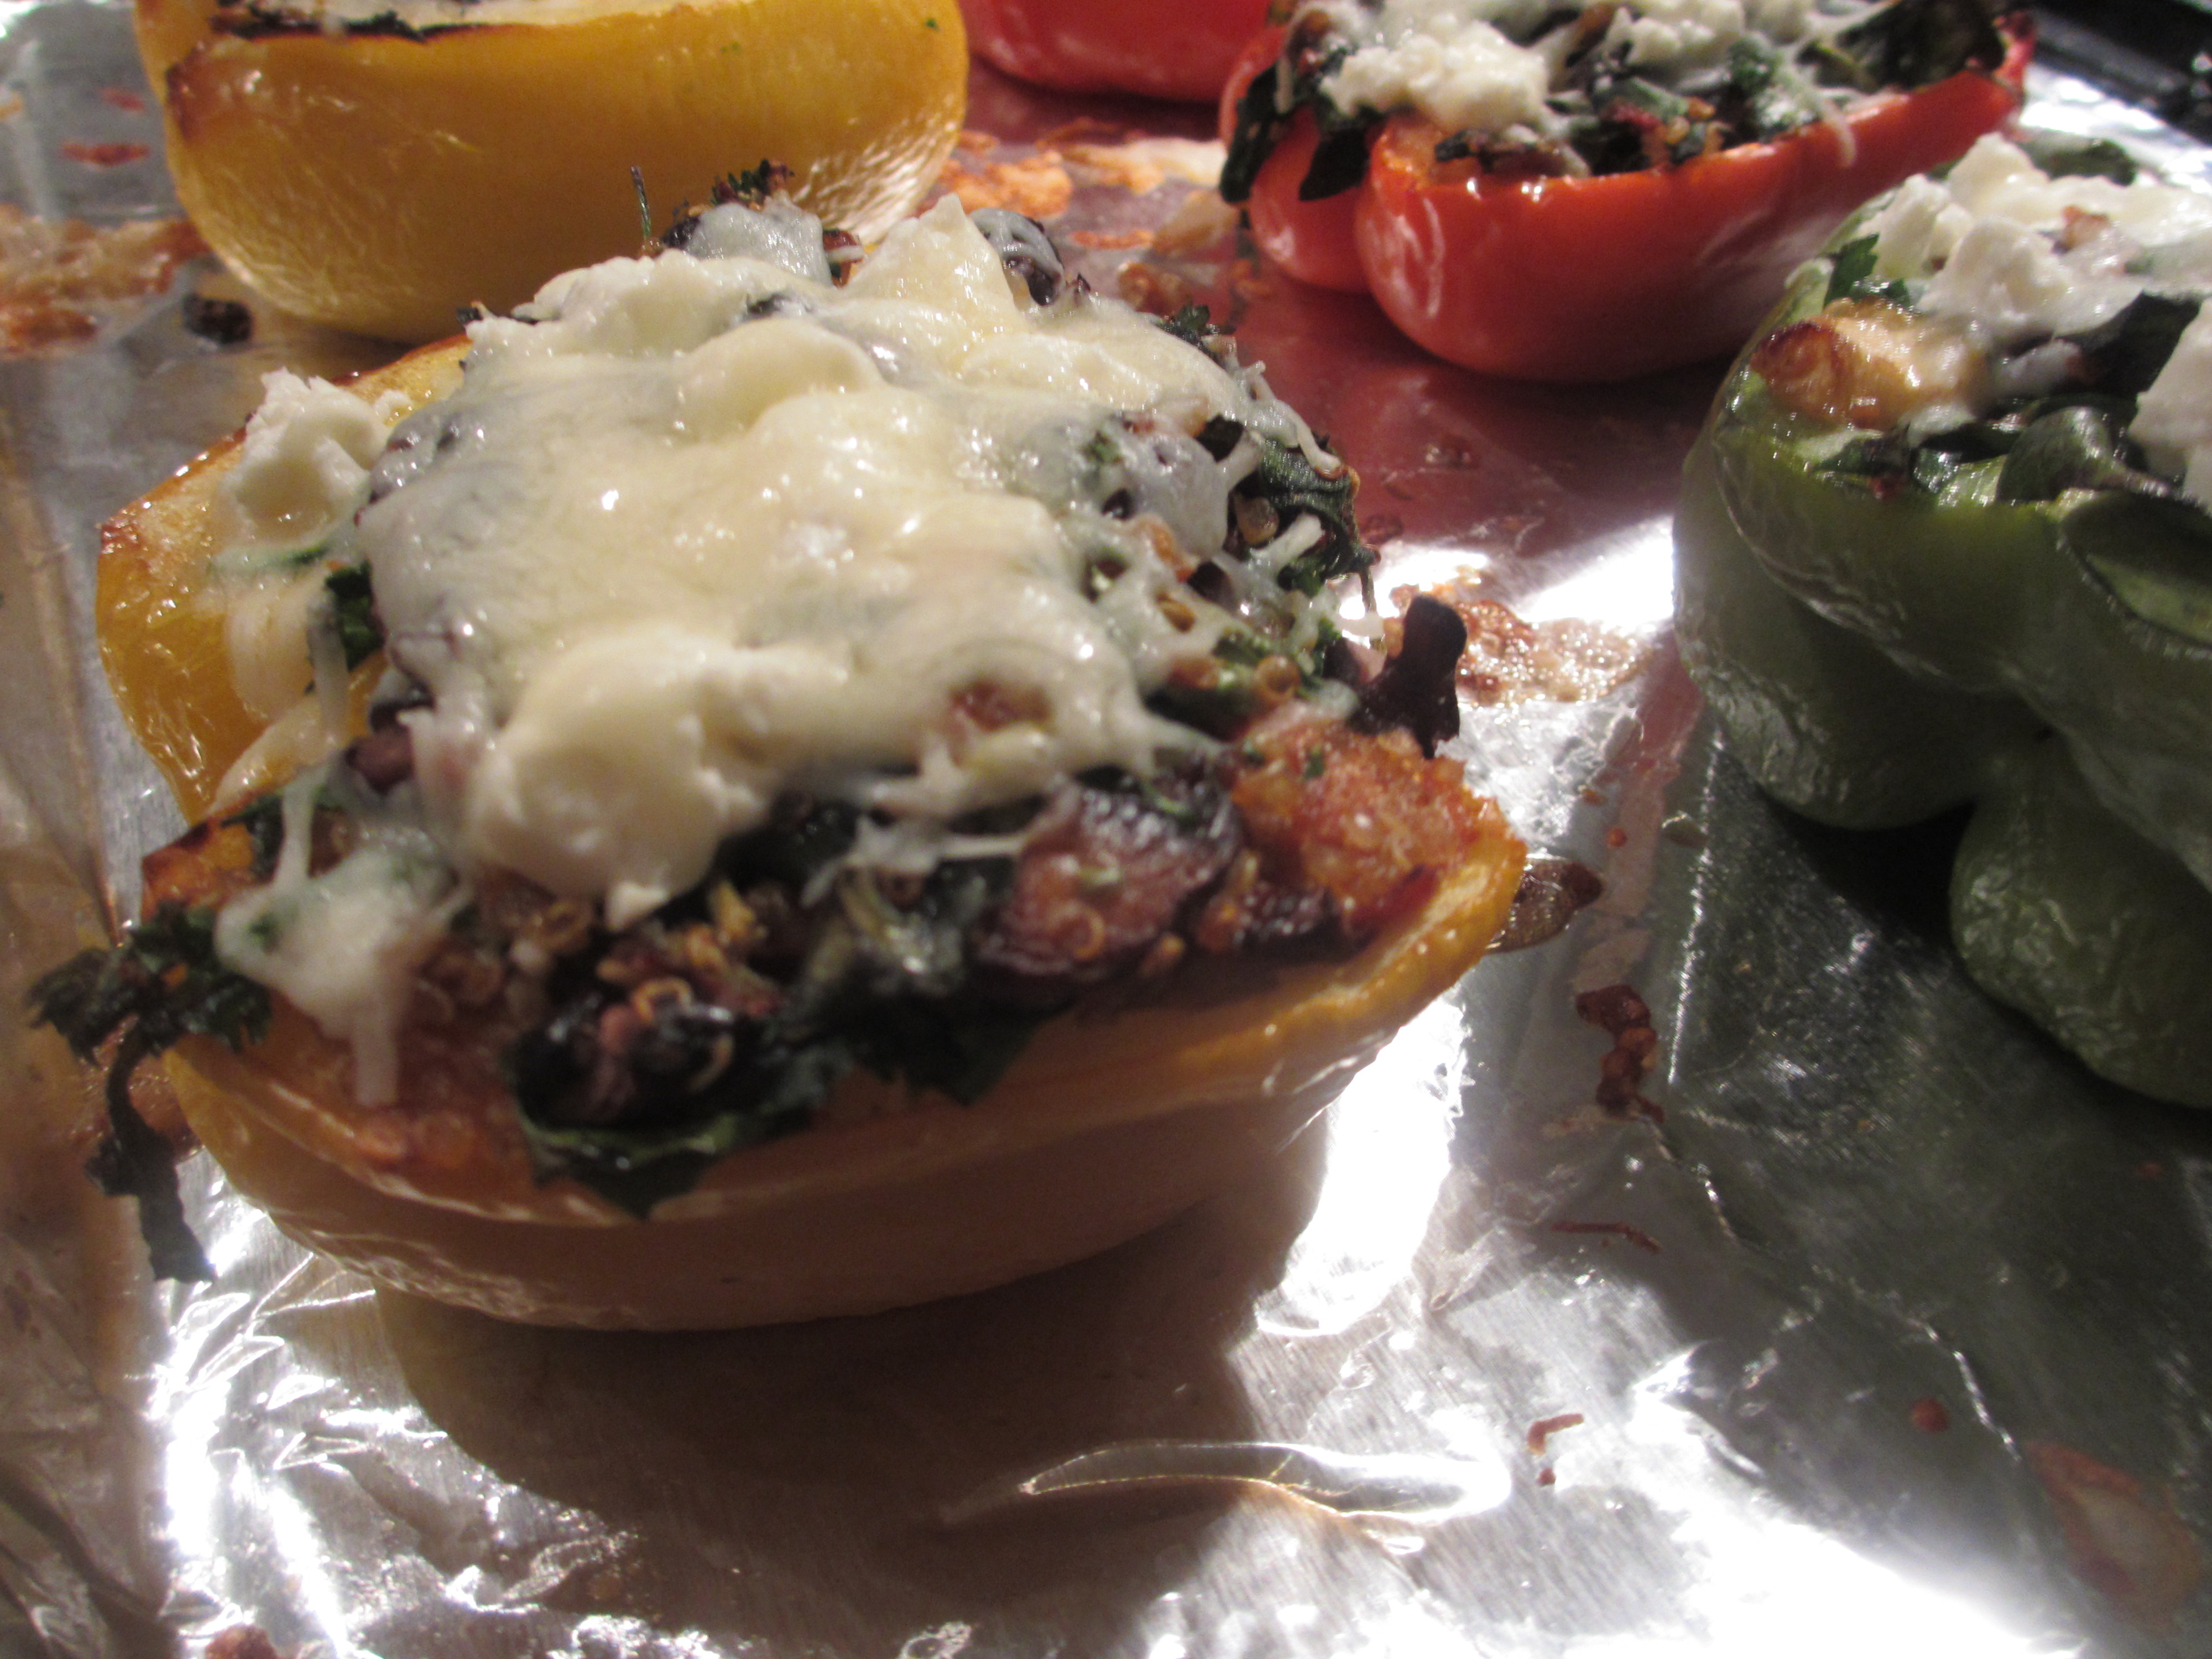 Stuffed bell peppers with melted cheese